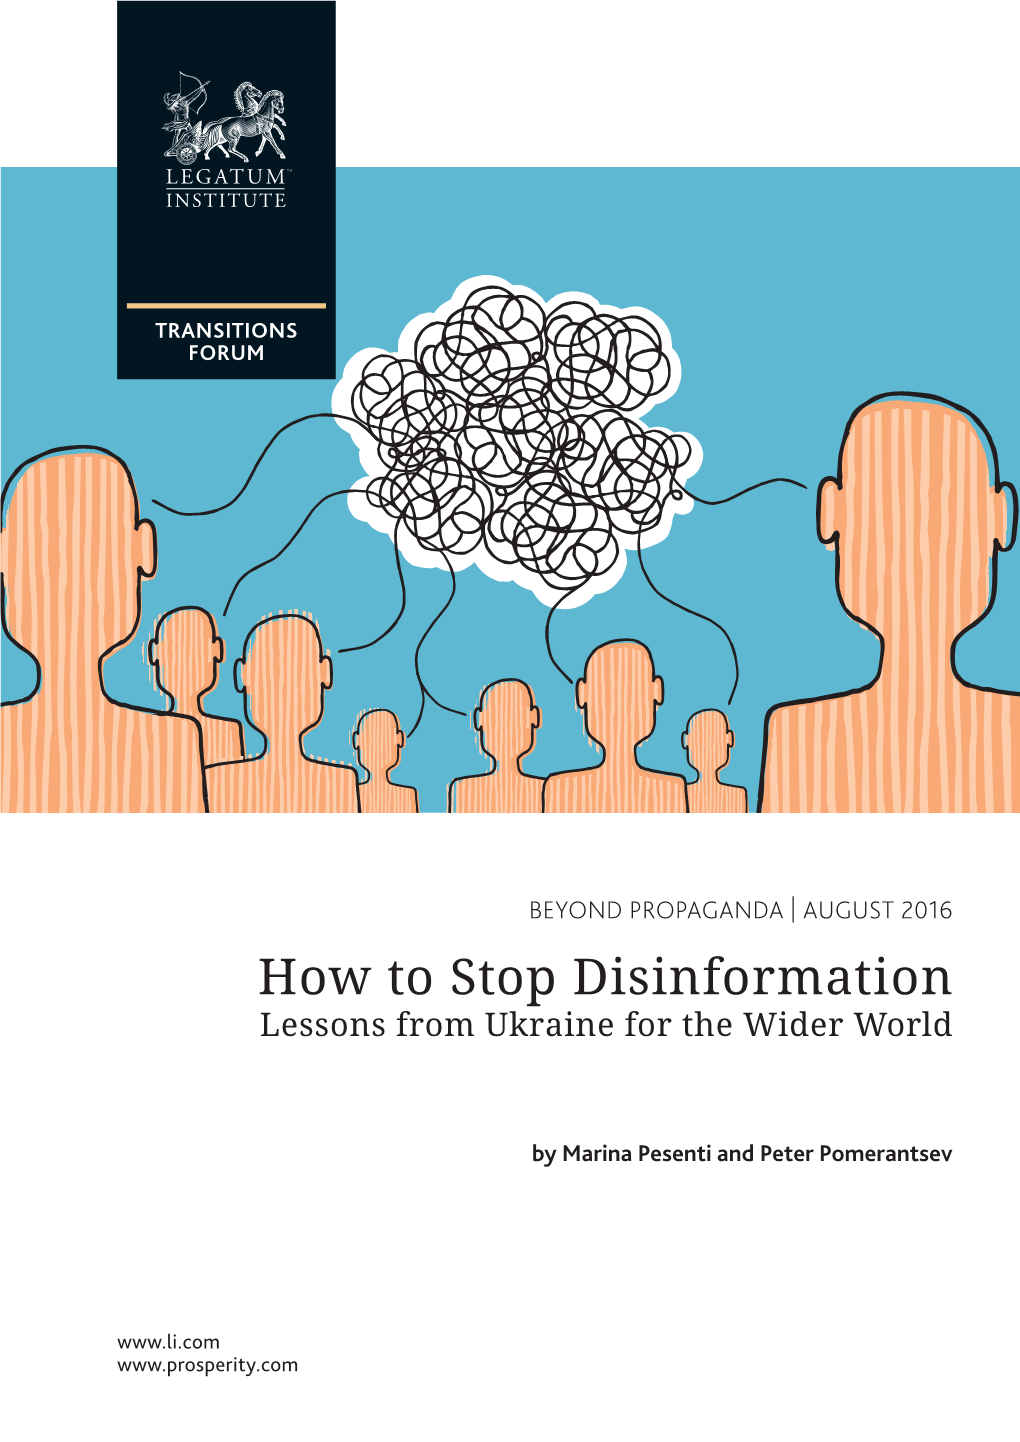 How to Stop Disinformation: Lessons from Ukraine for the Wider World